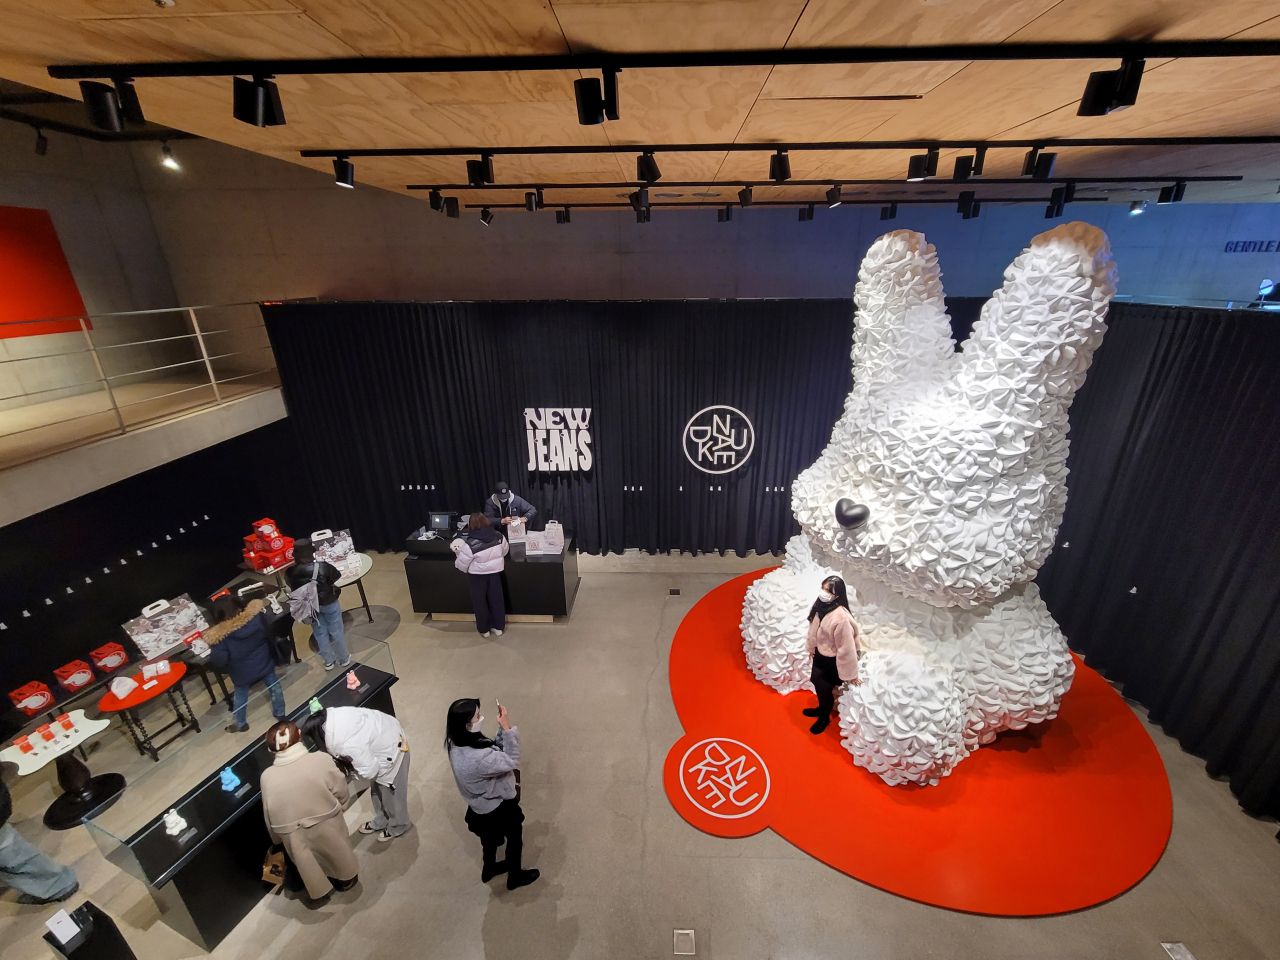 Visitors take a photograph with the rabbit installation on Tuesday at the pop-up store “OMG! NU+JEANS” in Seoul. (Park Yuna/The Korea Herald)